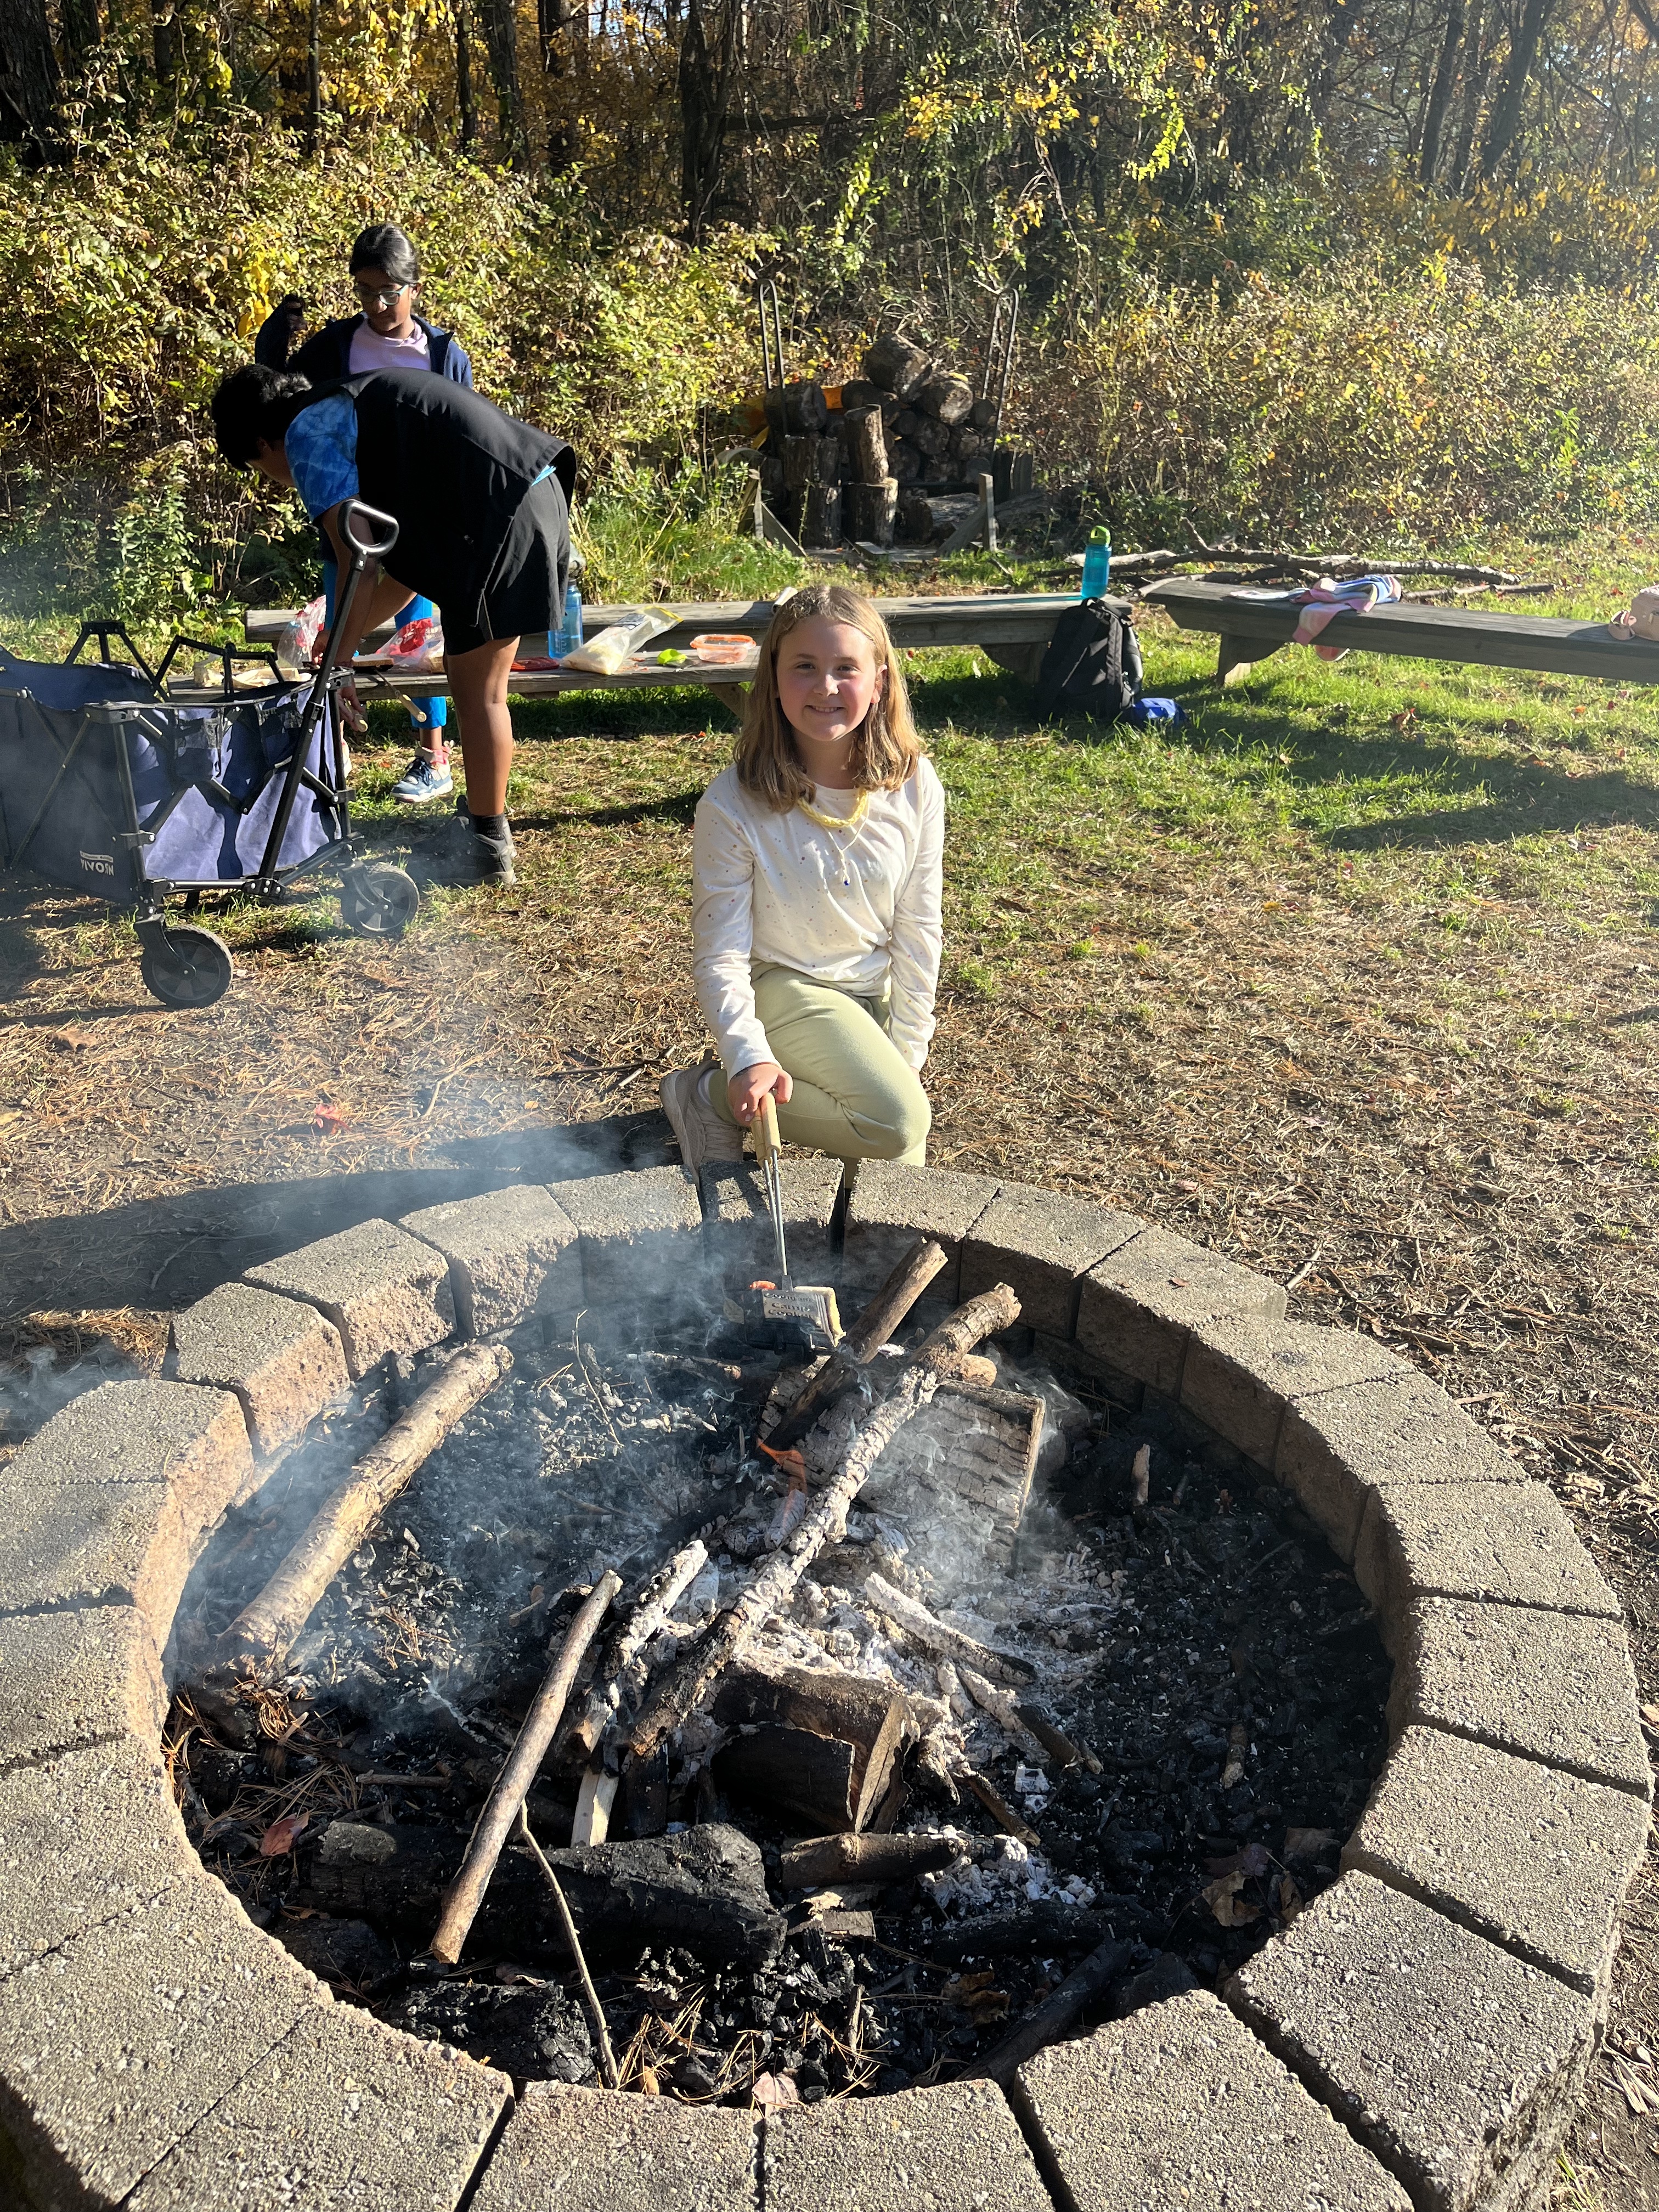 Student poses in front of firepit while making s'mores.